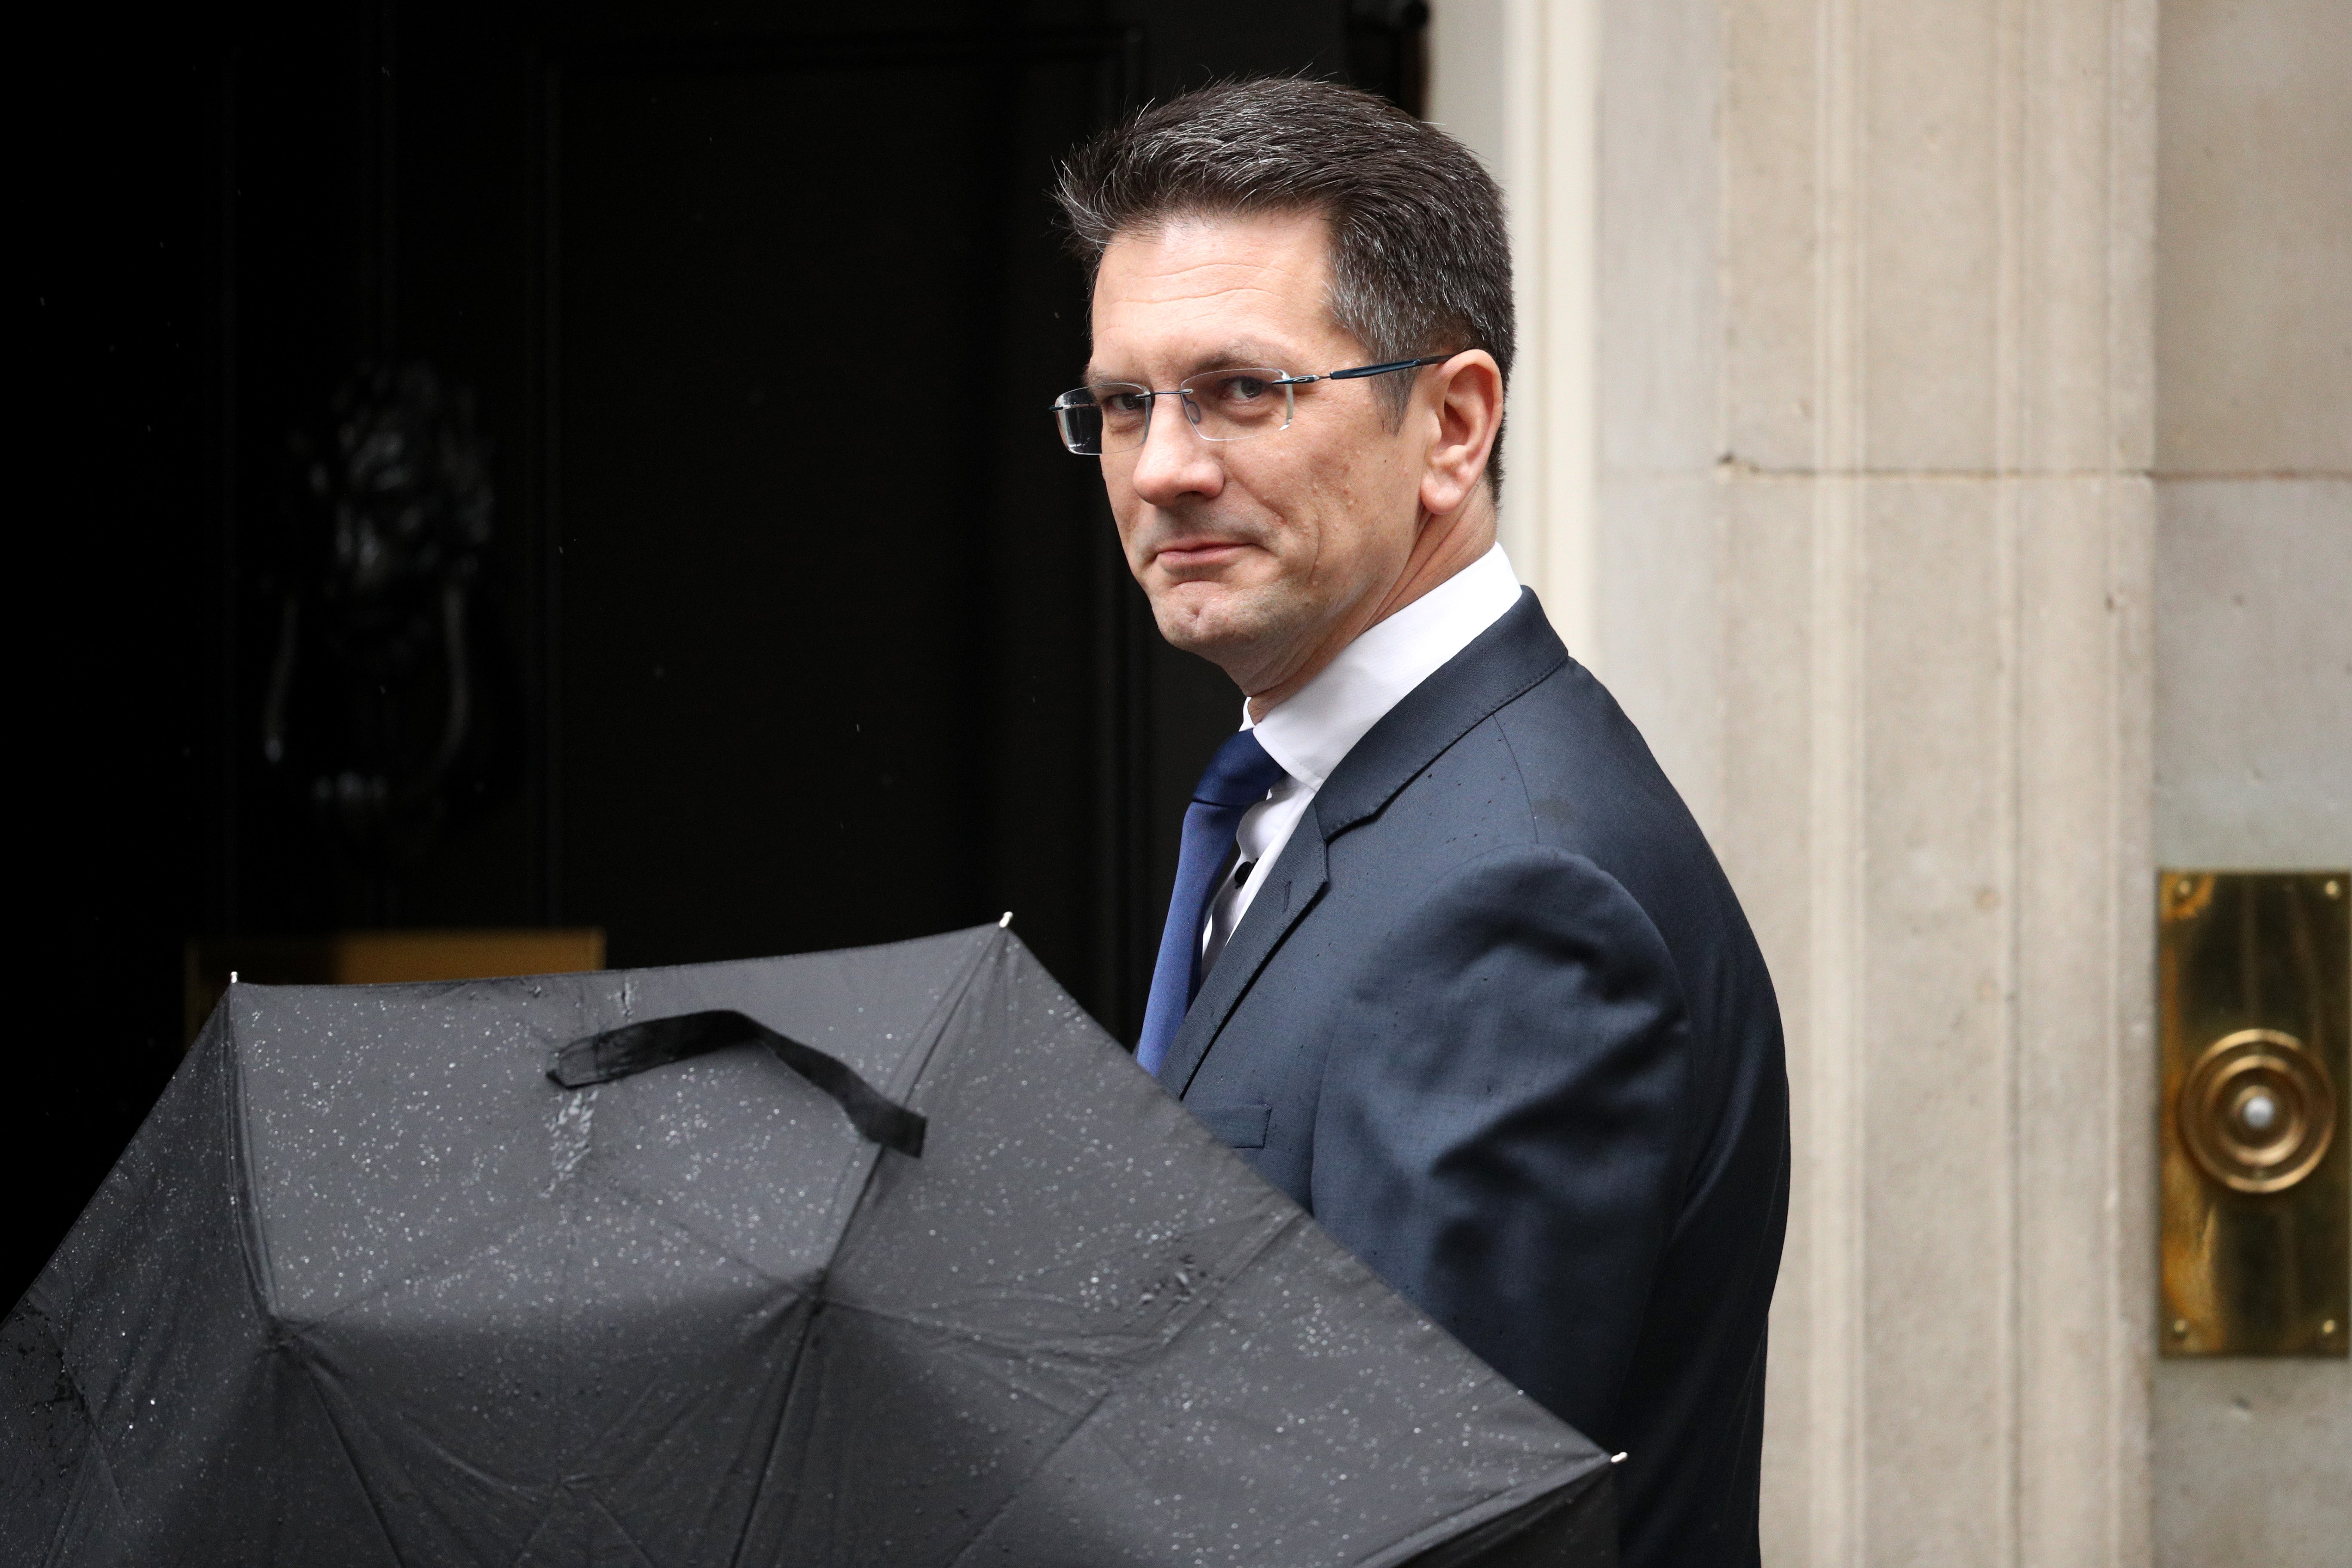 Steve Baker, who said he would be campaigning for his seat while on holiday on Greece, is set to lose to Labour